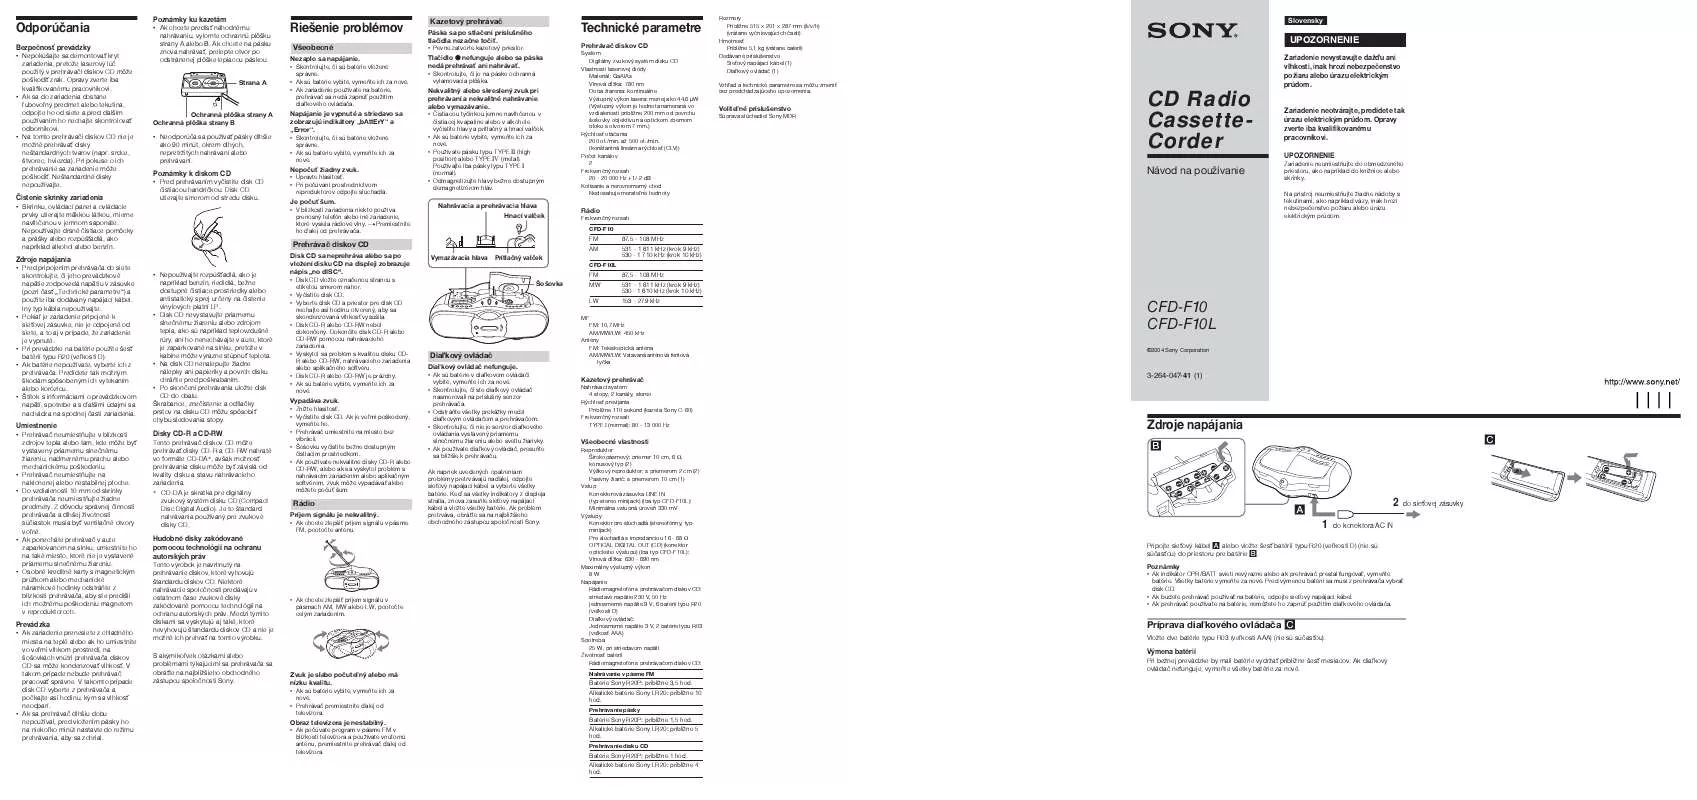 Mode d'emploi SONY CFD-F10L